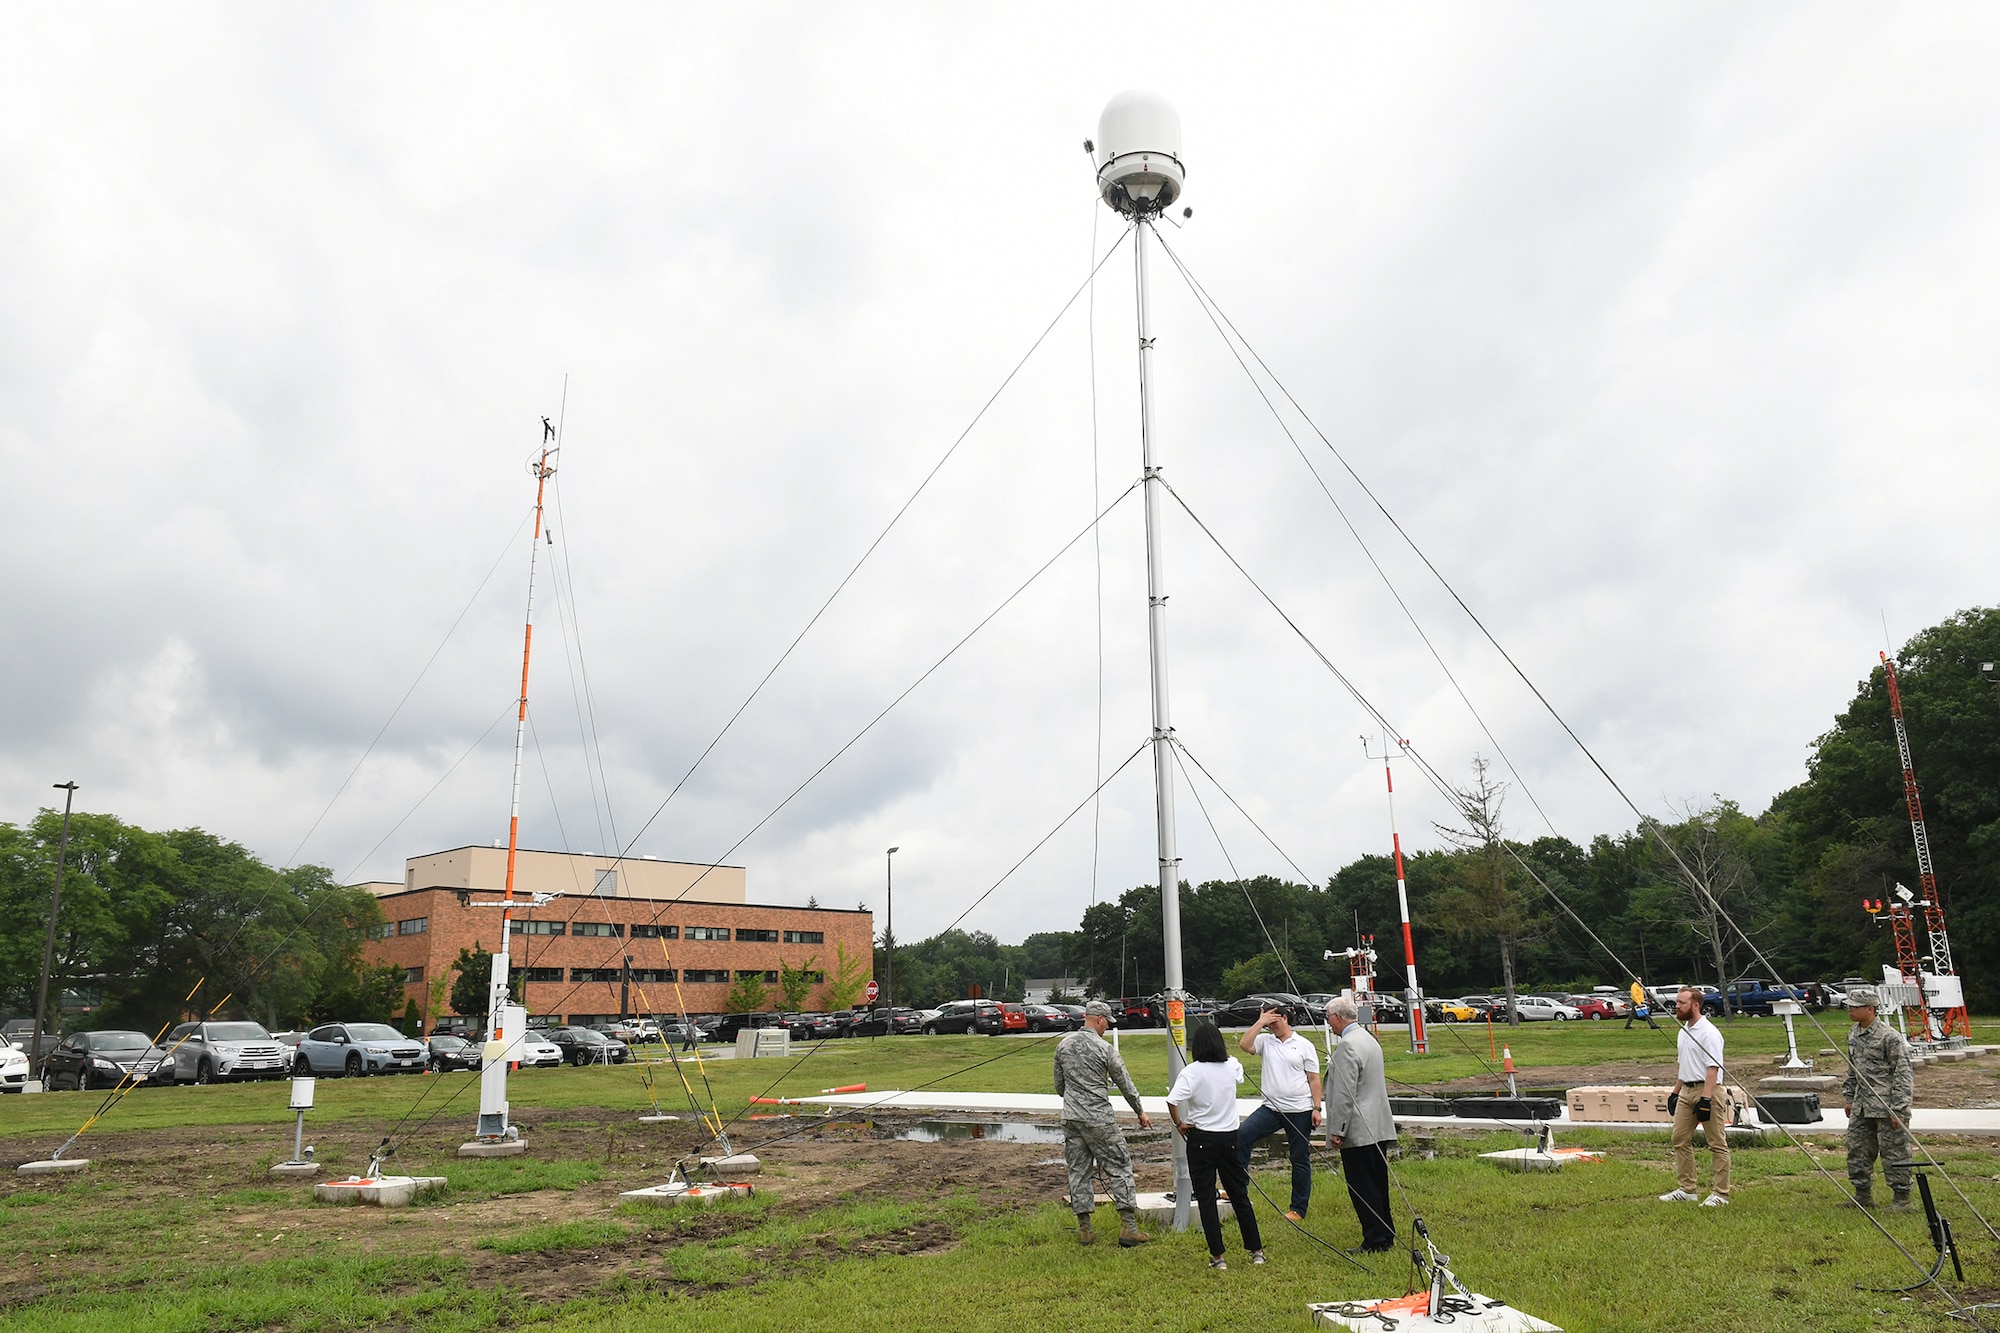 Airmen, civilians and contractors set up the Hanscom Air Force Base, Mass. weather engineering facility Aug. 14. The WEF will give Hanscom’s weather engineers the ability to test, sustain and upgrade equipment used by military installations throughout the world to track and forecast weather. (U.S. Air Force photo by Todd Maki)